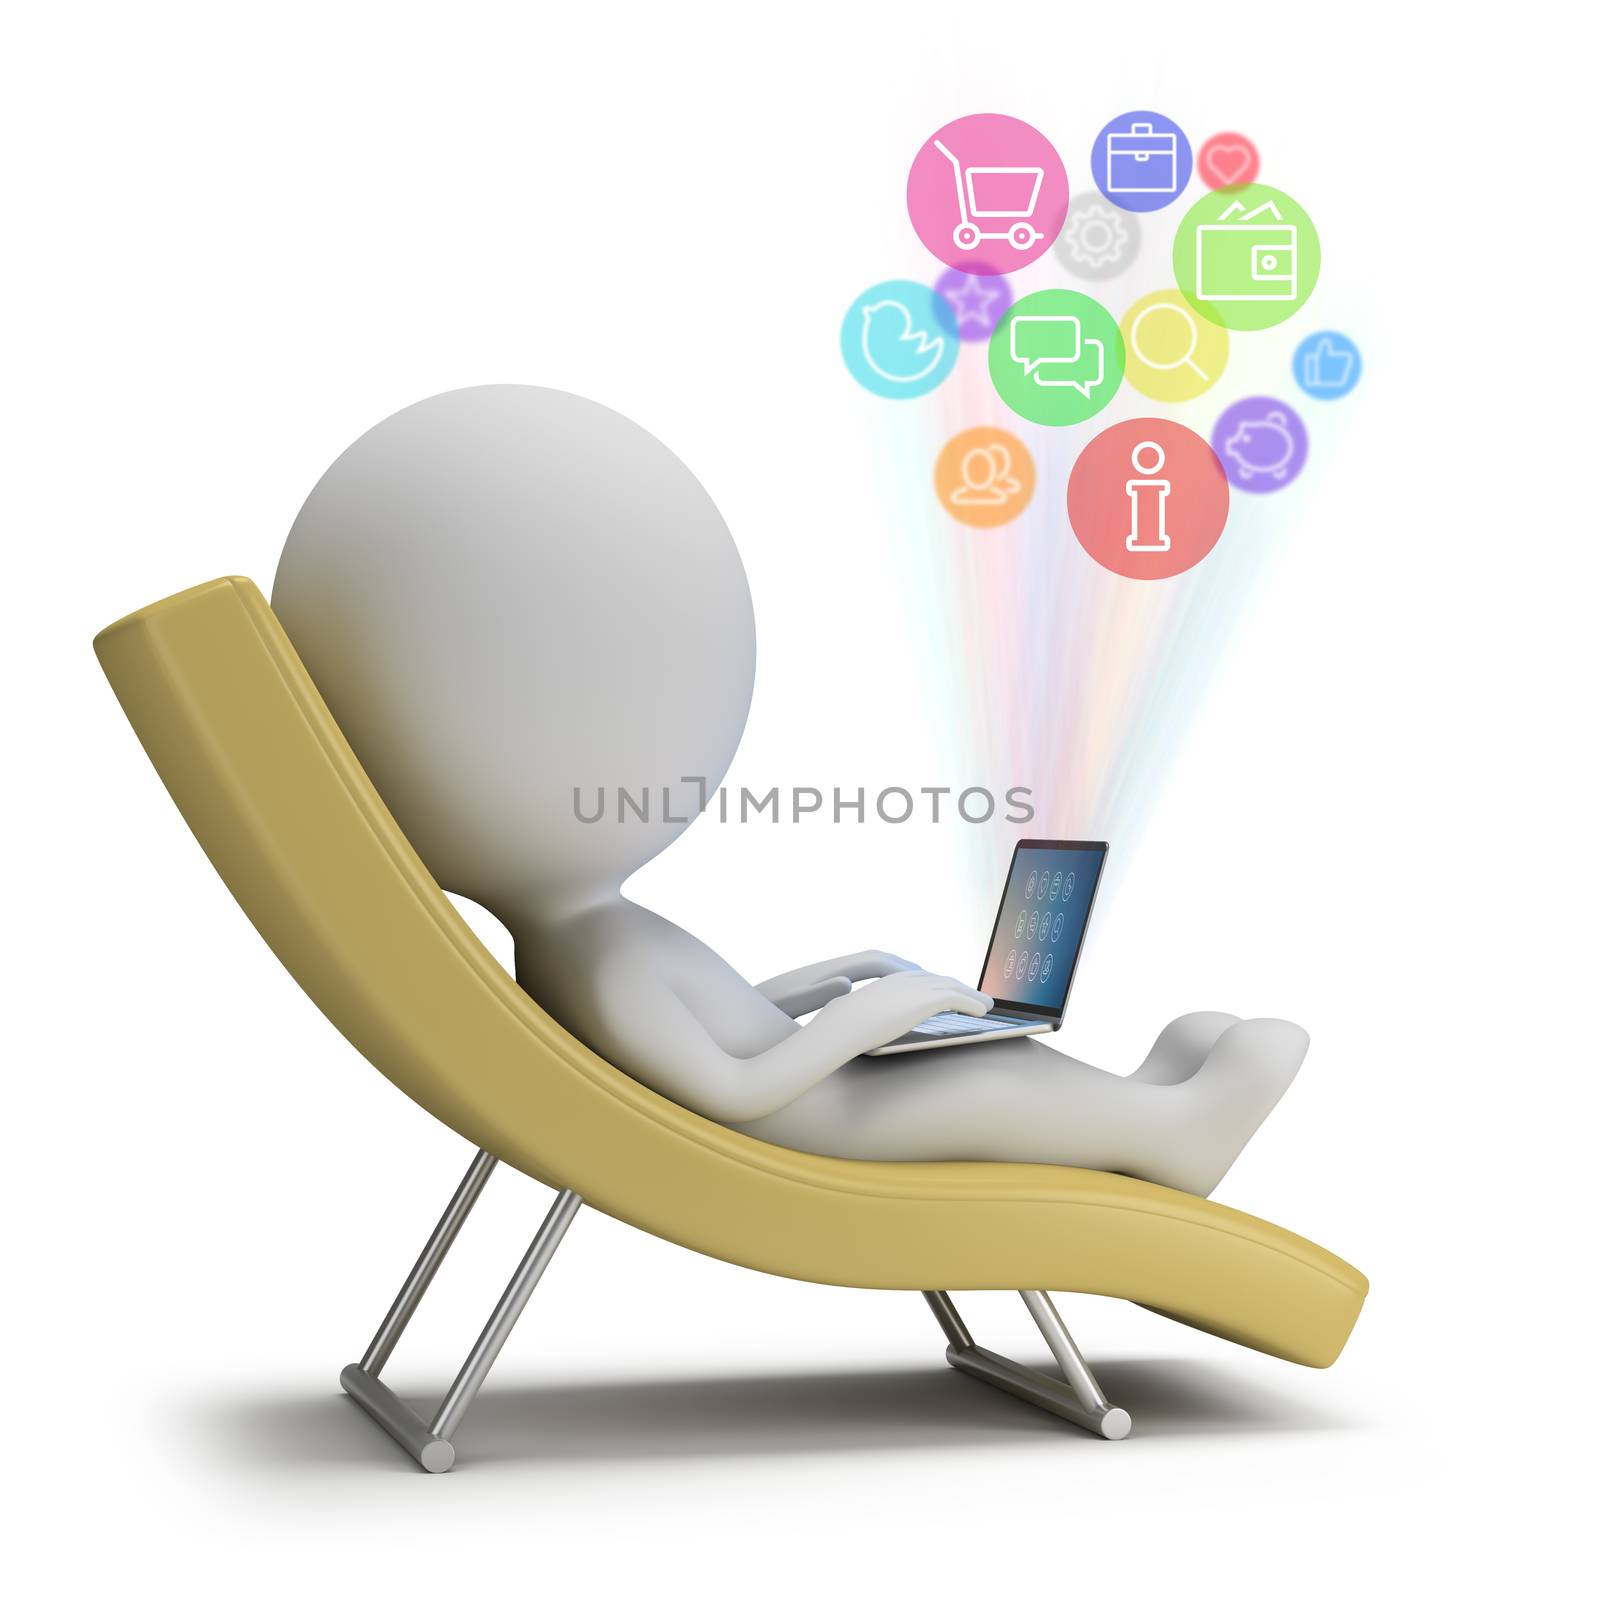 3d small person lies with a laptop on a chaise lounge. Internet services. 3d image. White background.